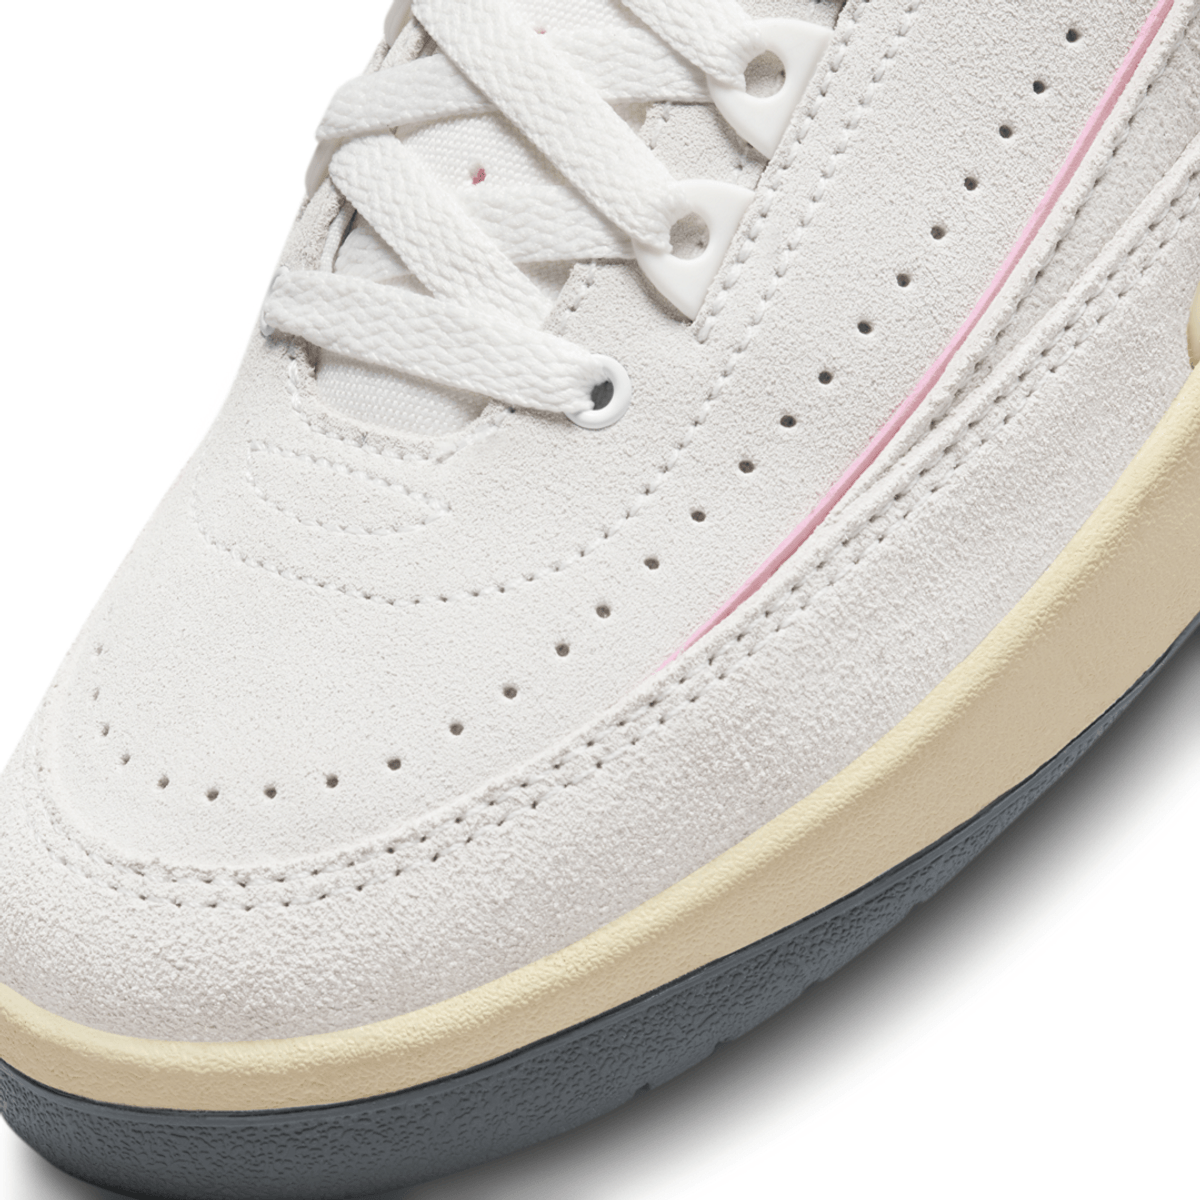 The Air Jordan 2 Soft Pink Will Be A Woman’s Exclusive Release